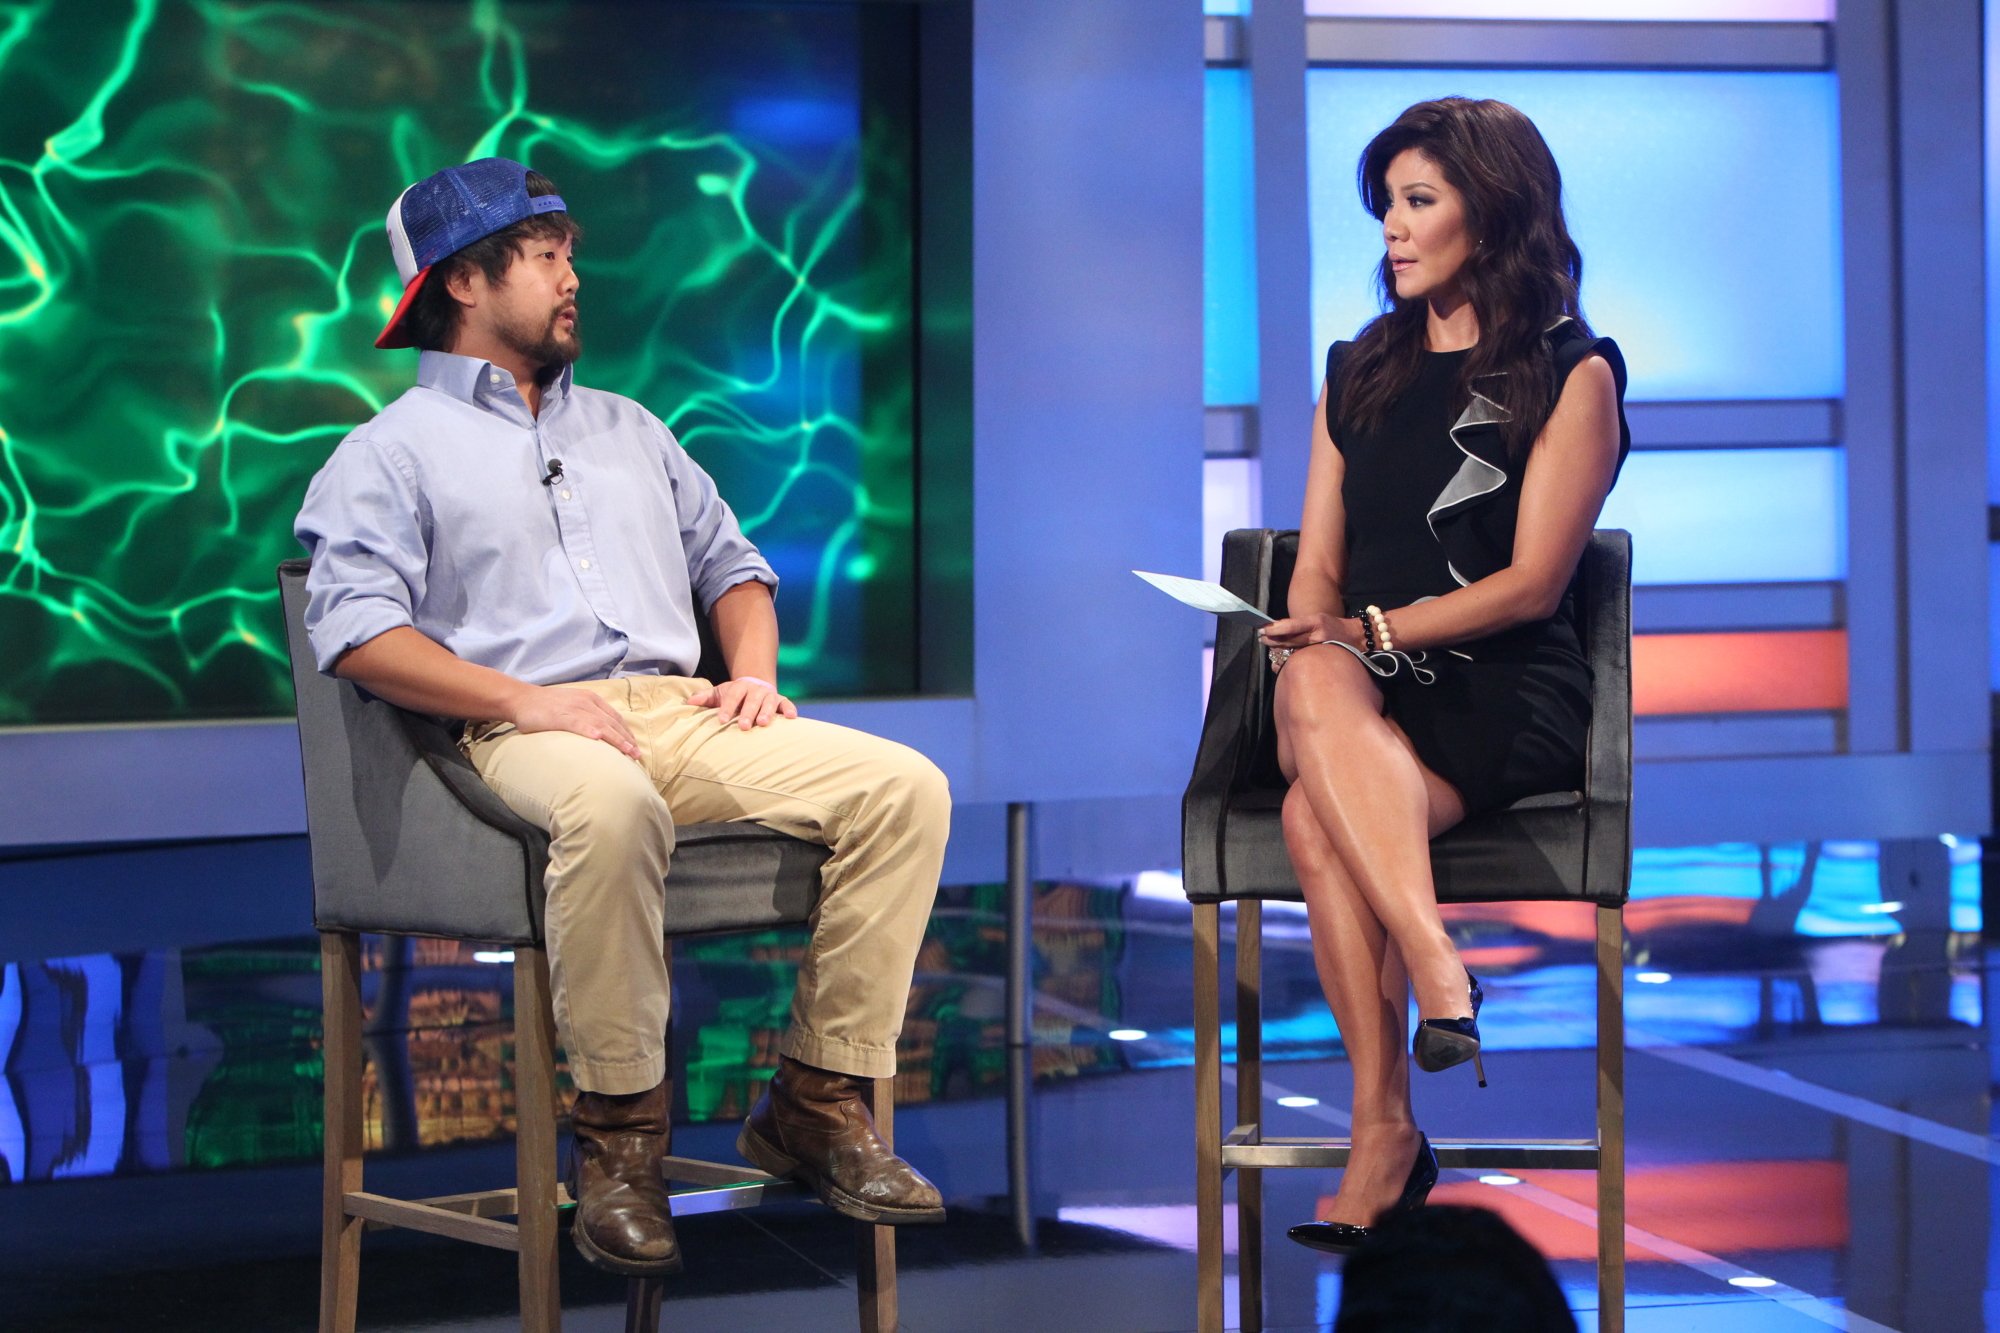 Host Julie Chen talks to the latest evictee, James Huling on the Big Brother season 18 live finale